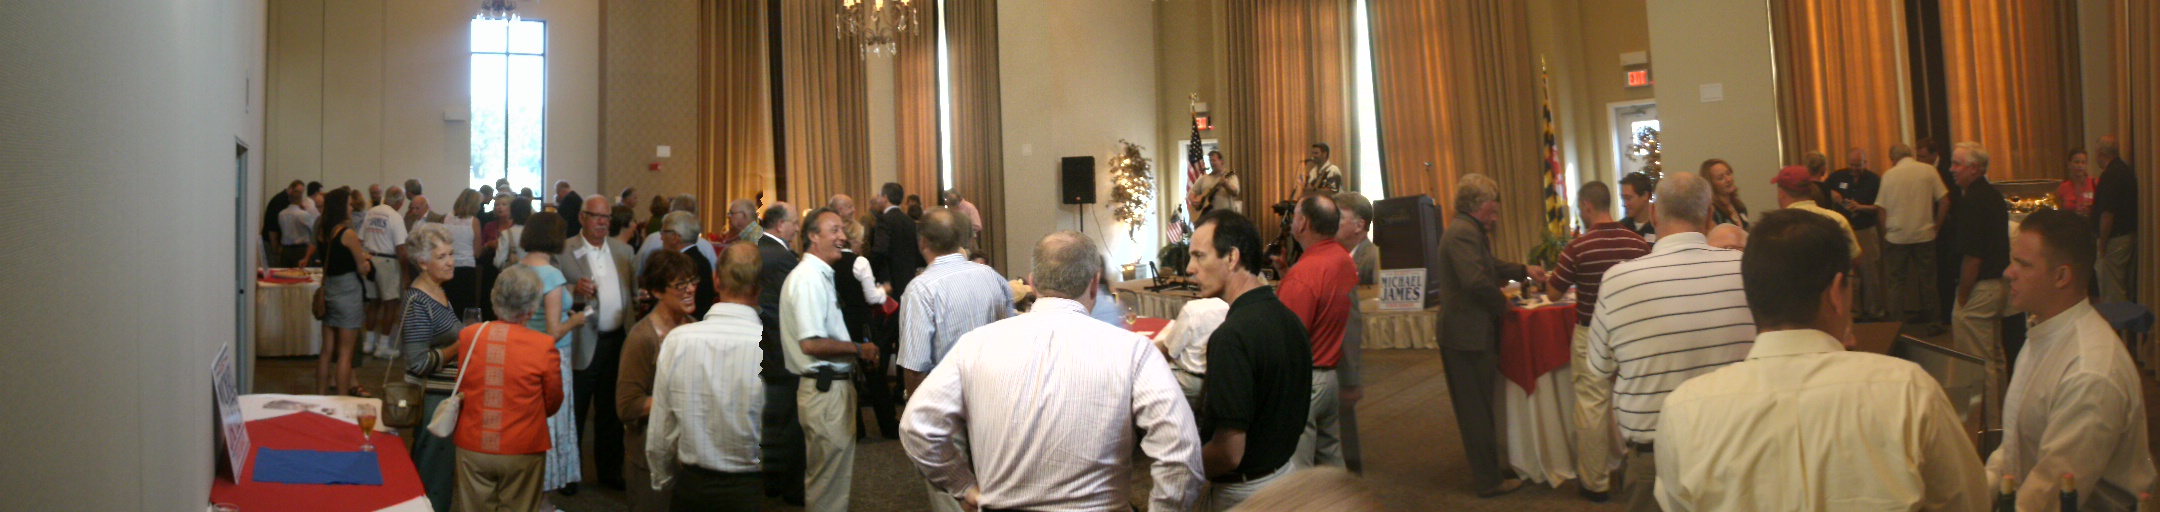 It looked like well over 75 people were in attendance for Michael James's fundraiser last night.